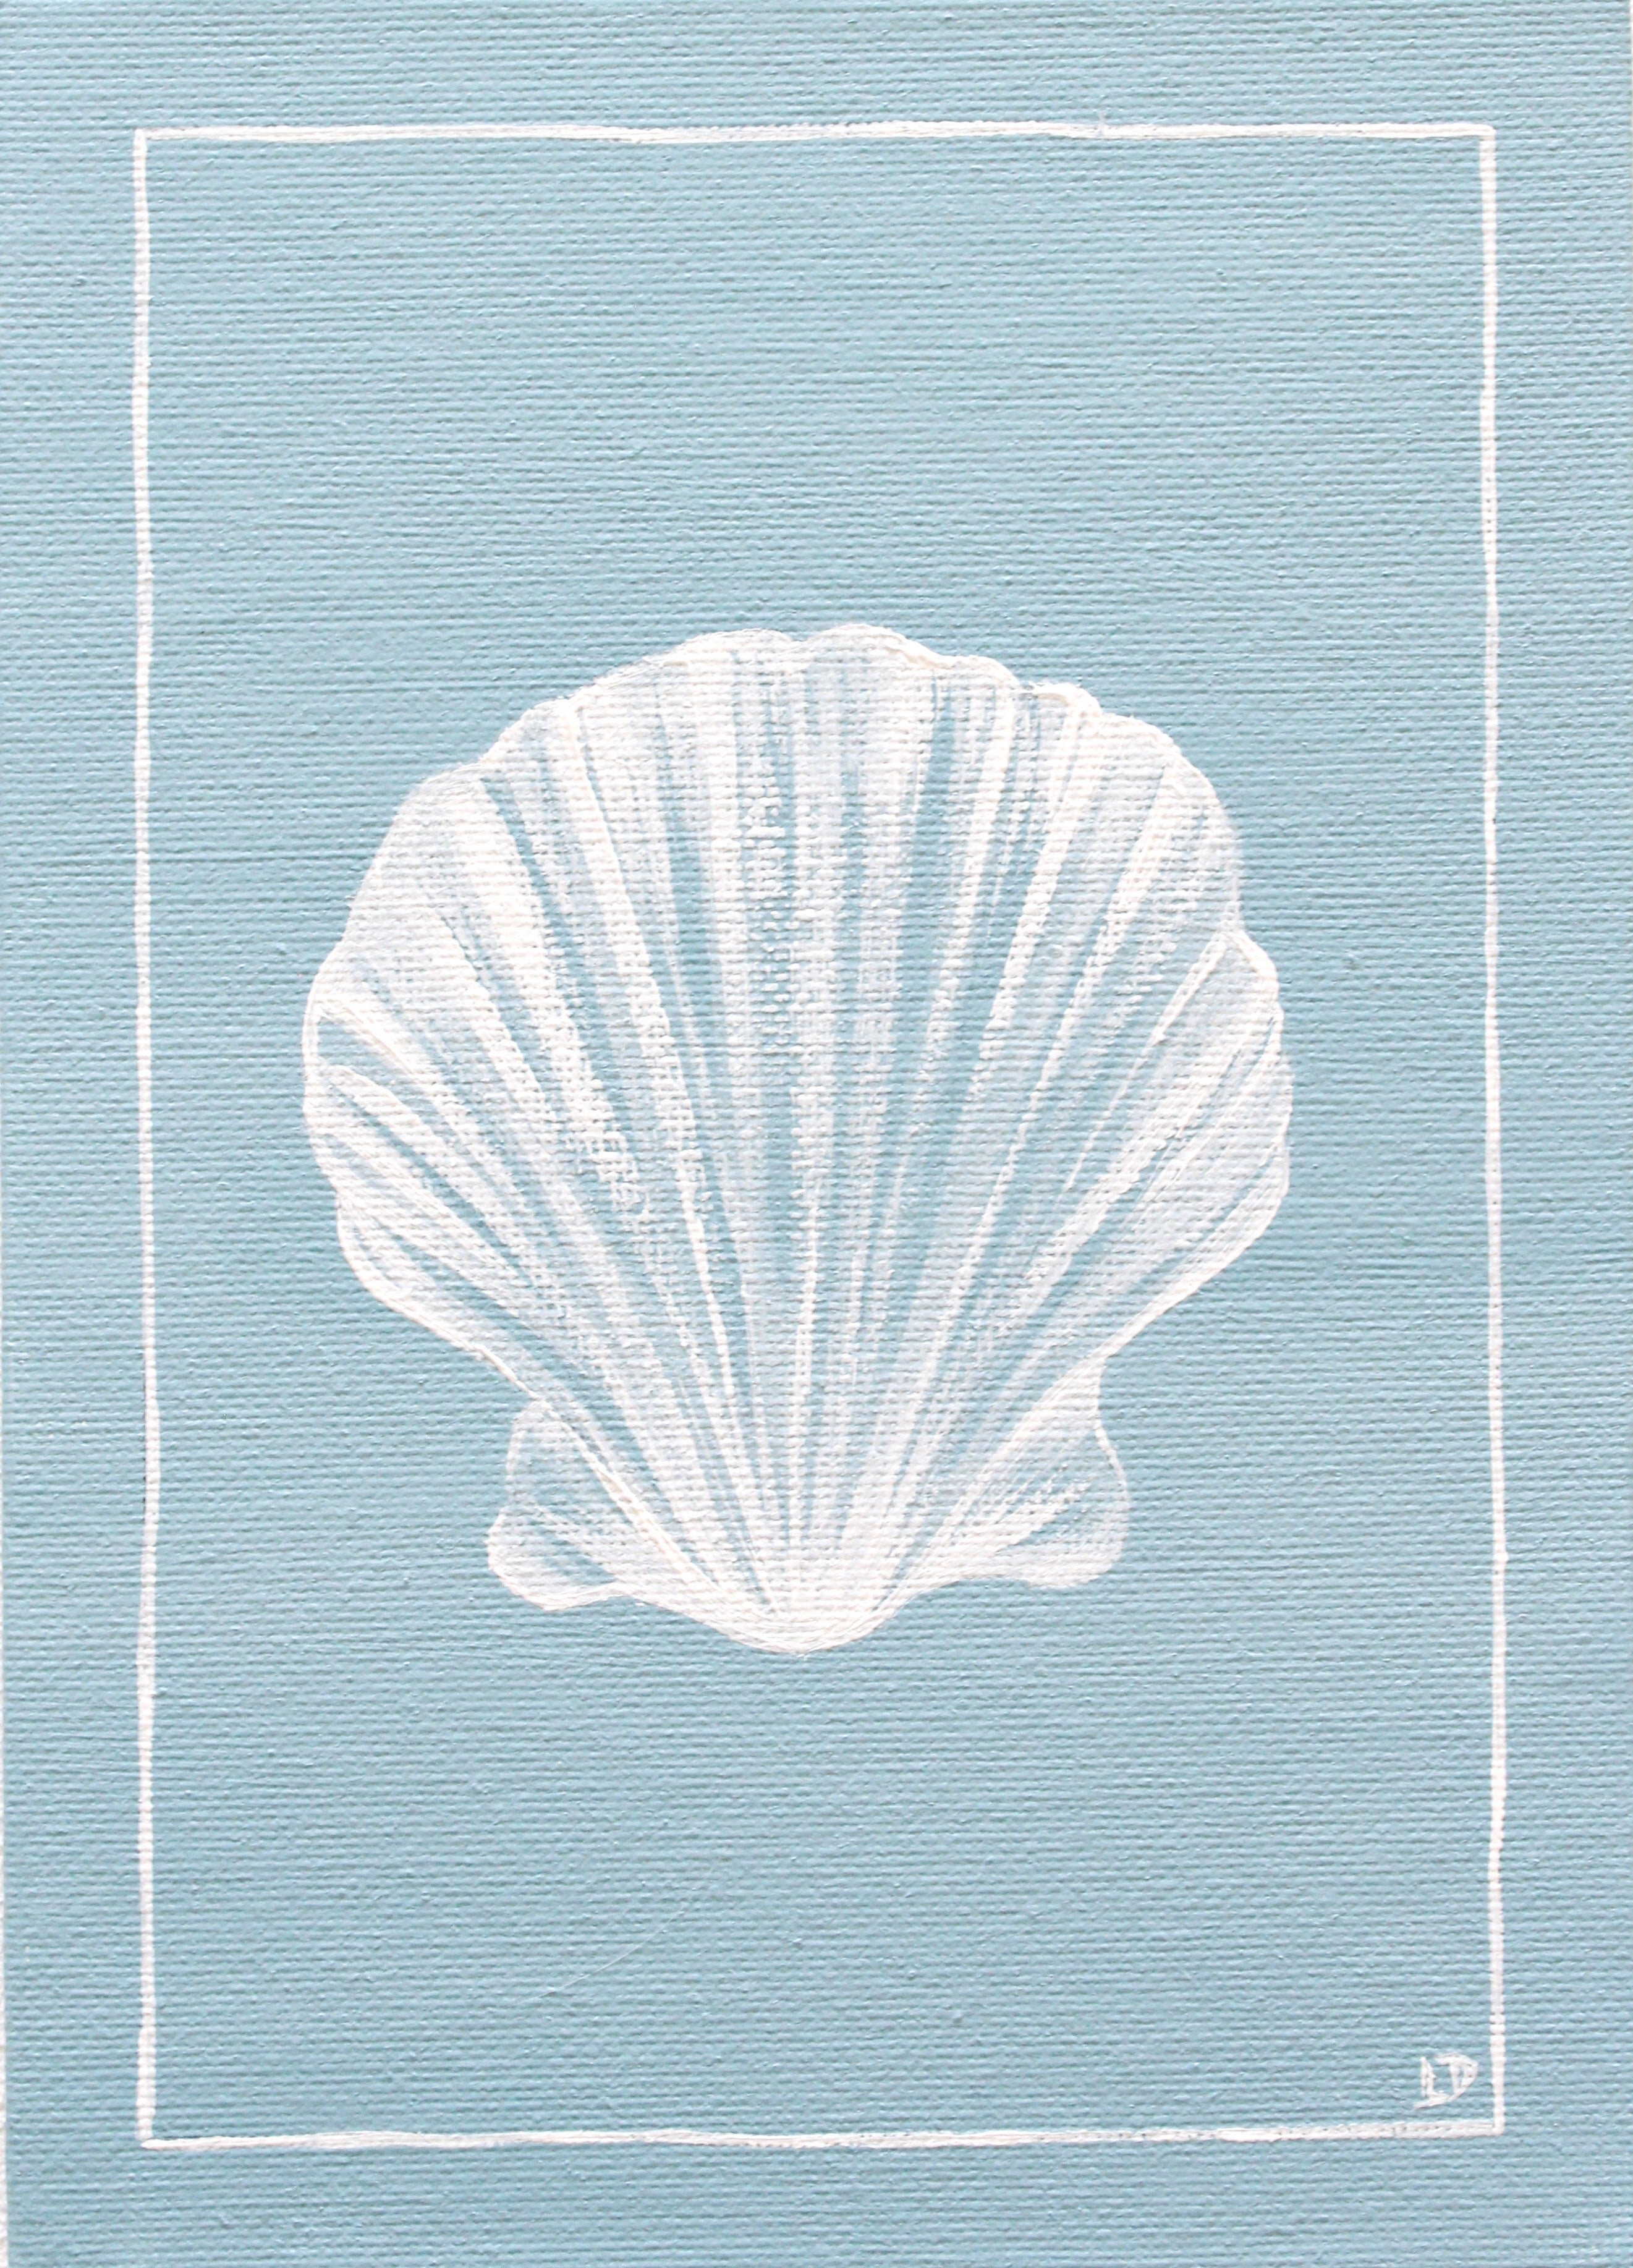 Petite Scallop Shell on Teal